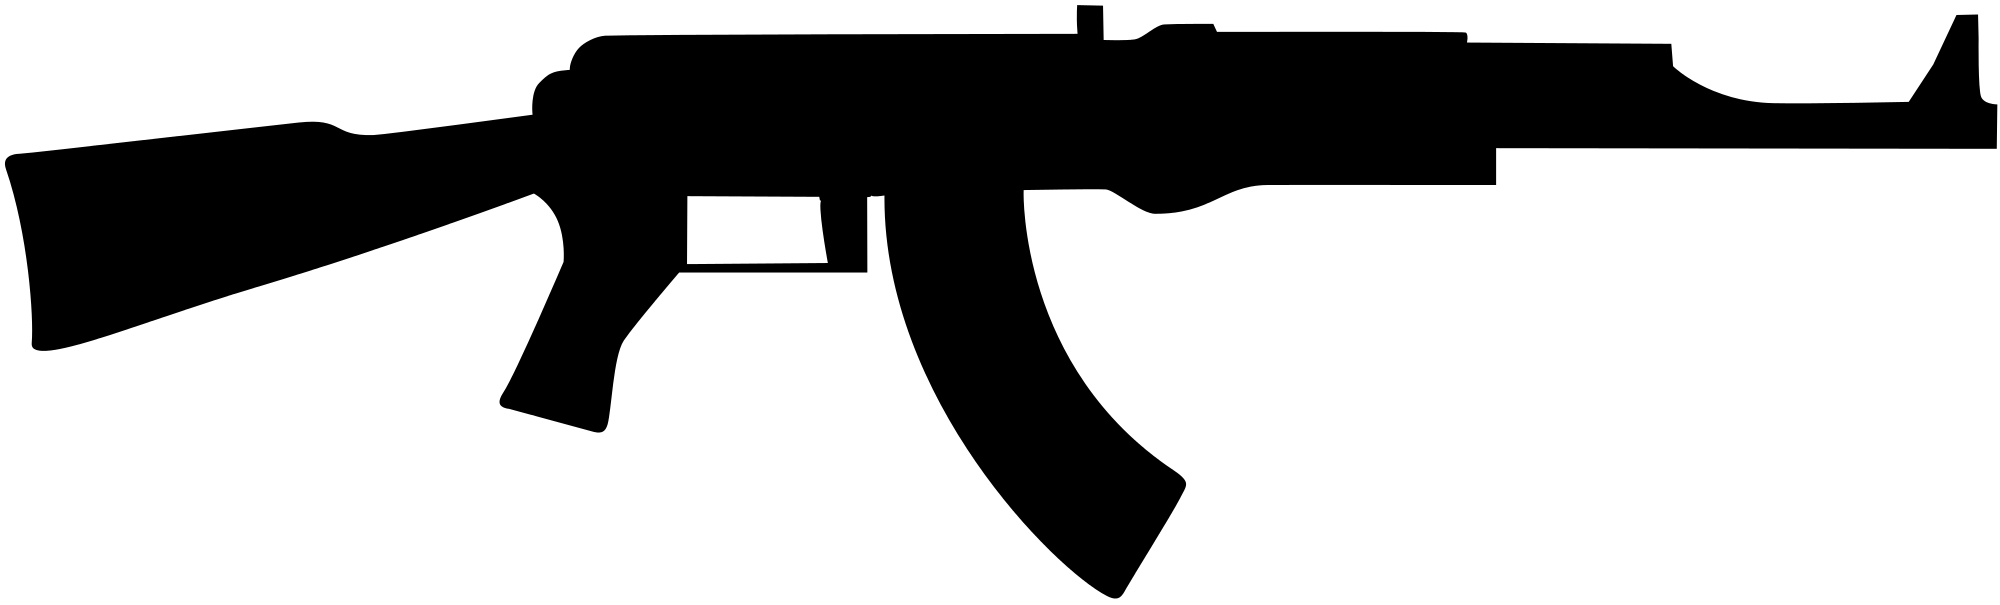 Ak47 outline png.